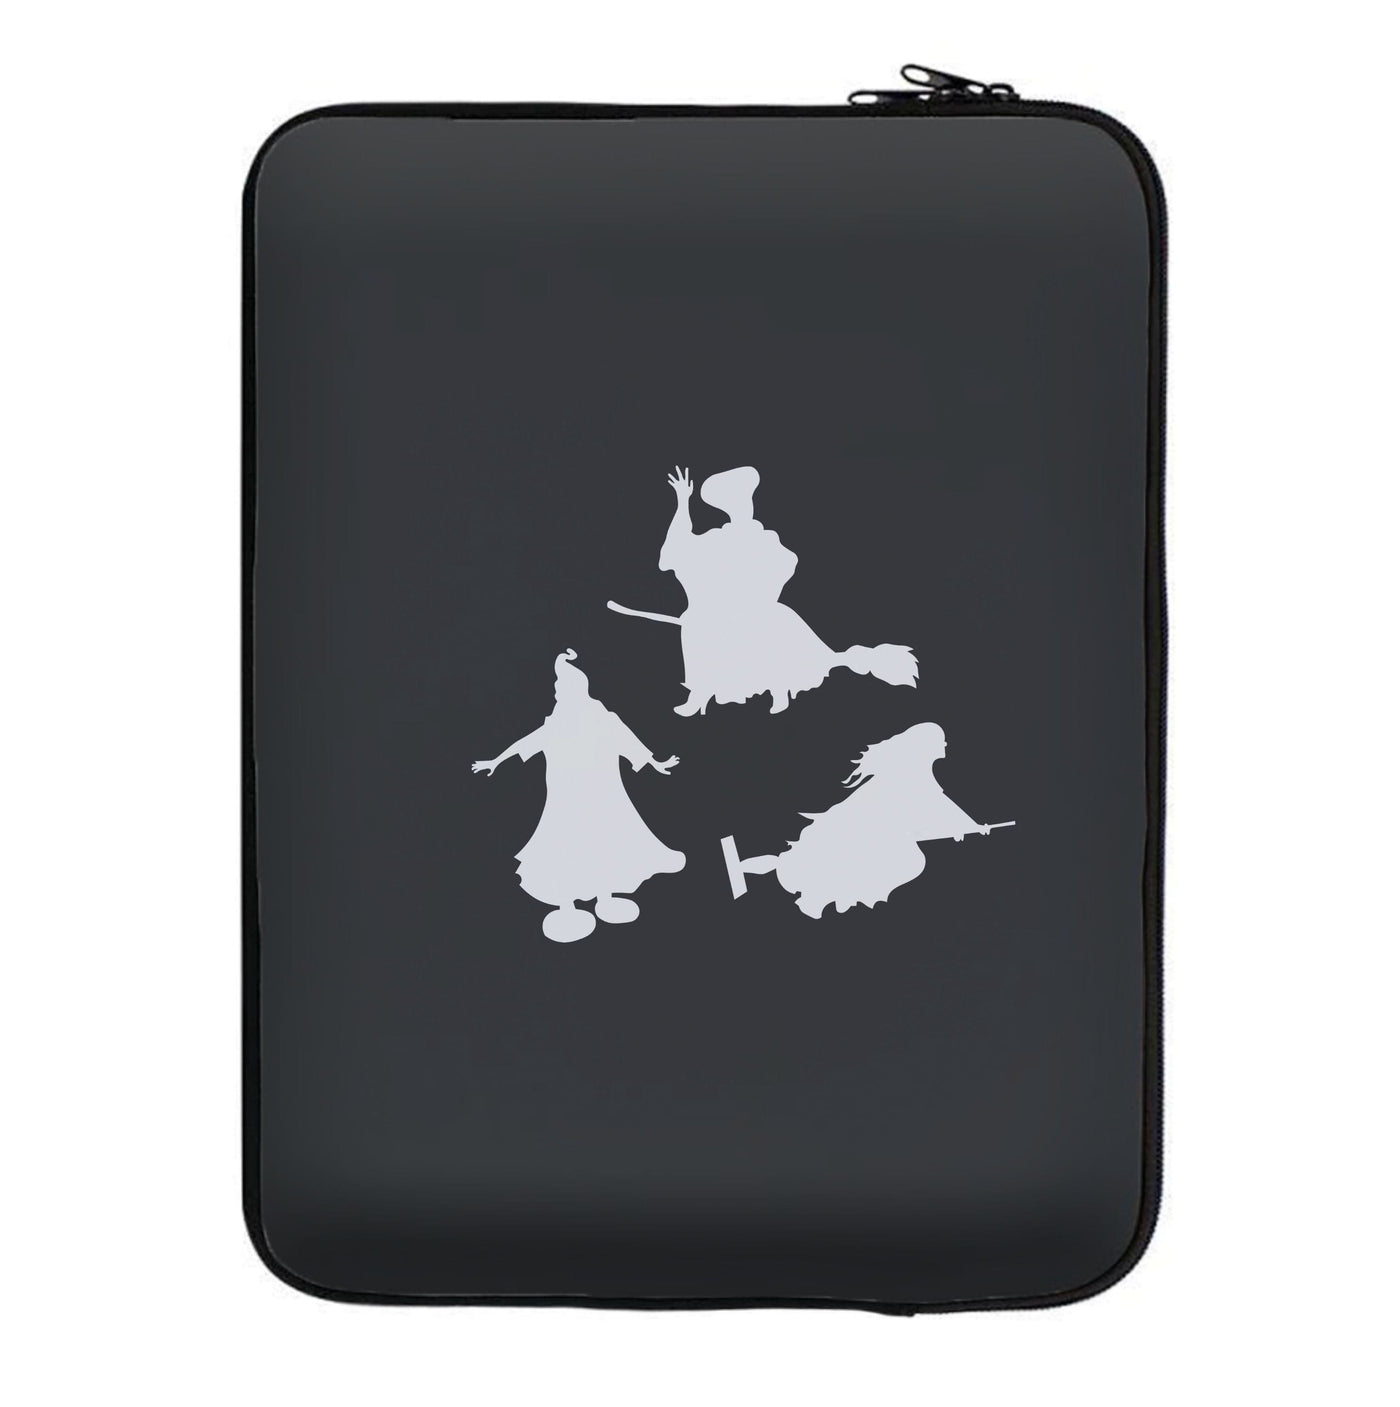 Witches Outline - Hocus Pocus Laptop Sleeve